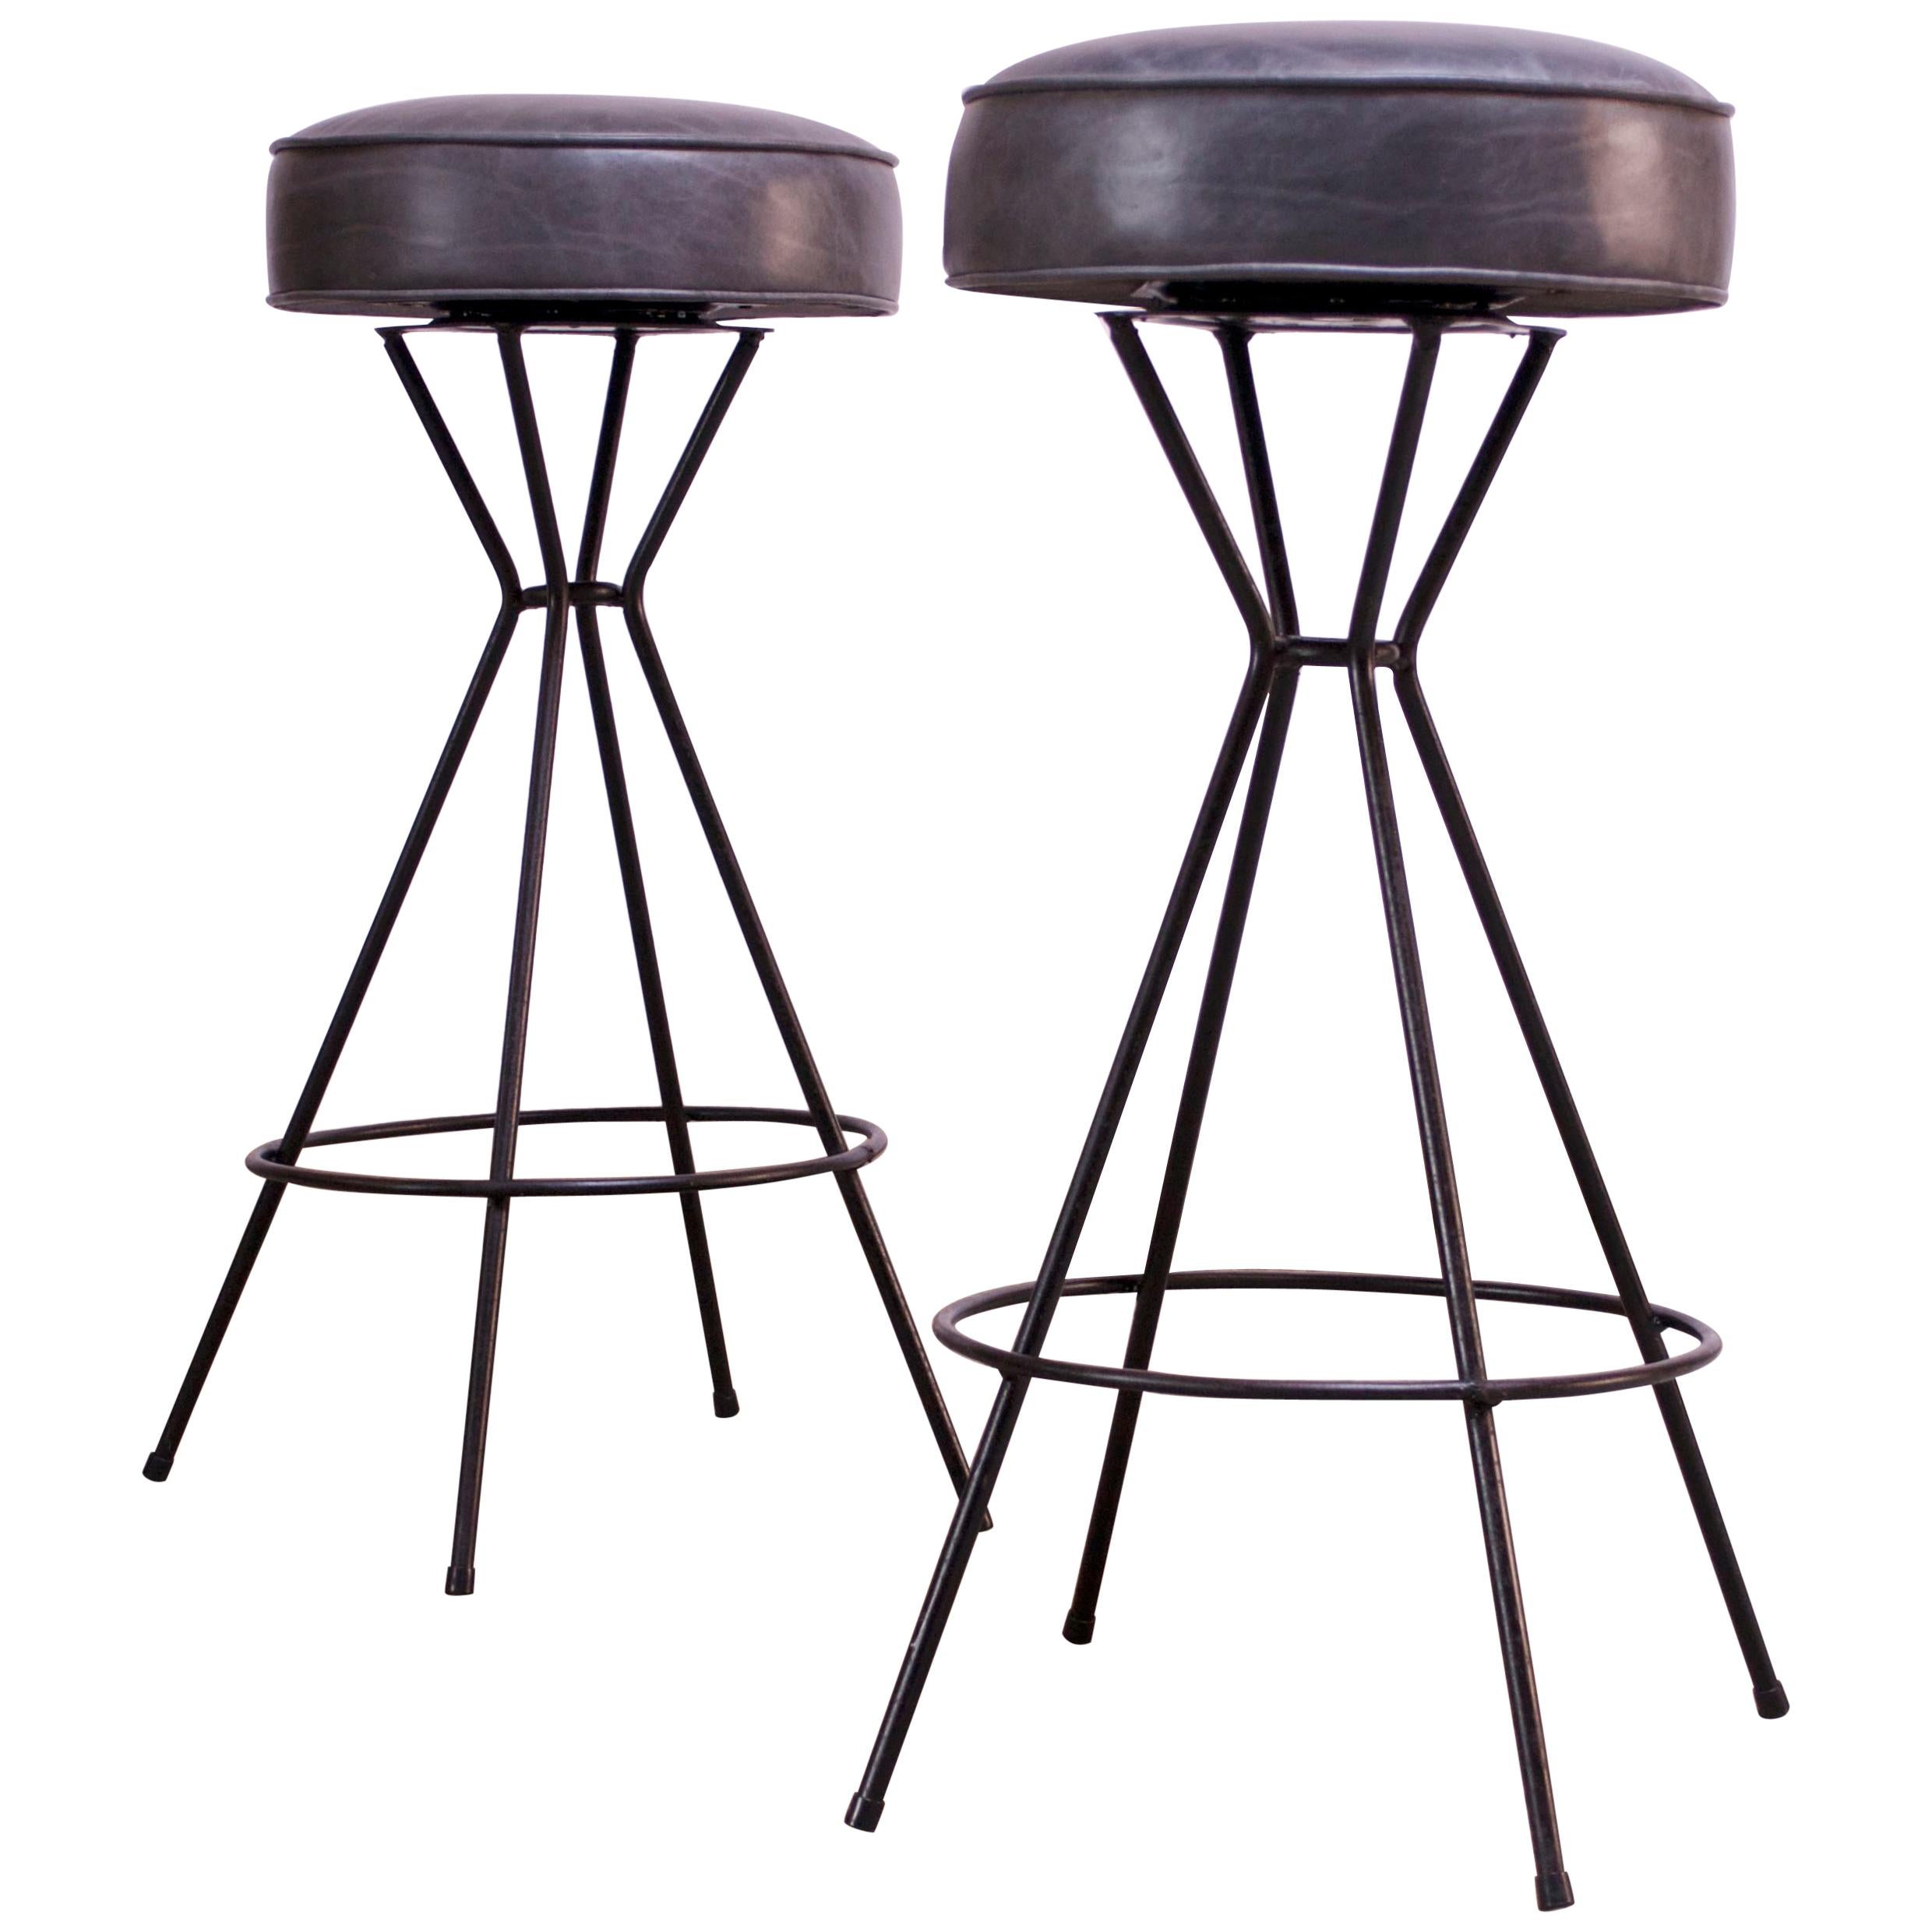 Pair of Mid-Century Modern Wrought Iron and Leather Swivel Bar Stools